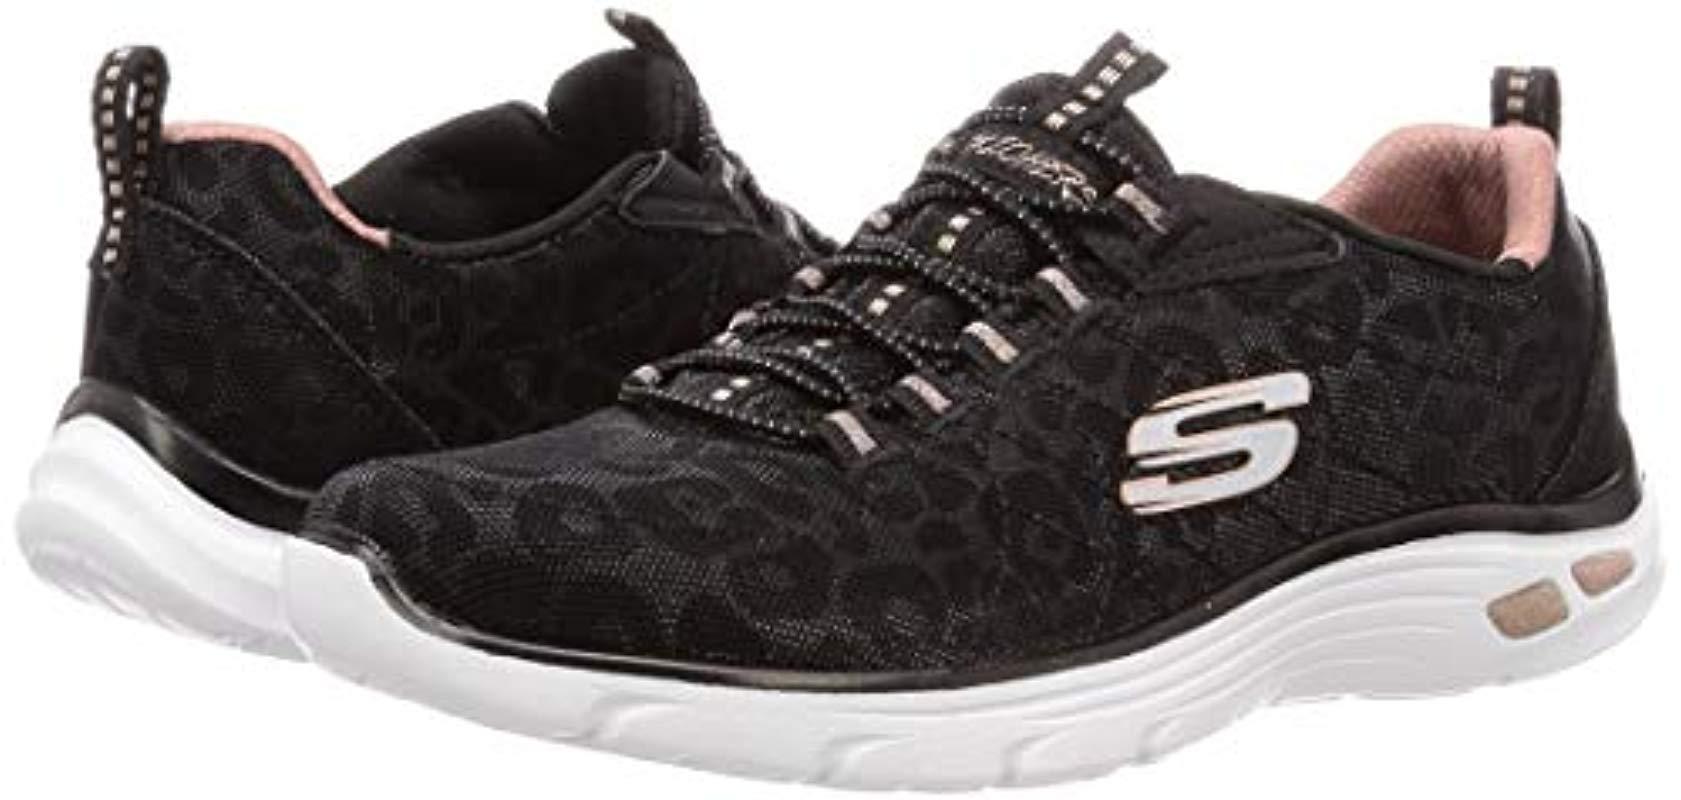 Skechers Empire D'lux-spotted Trainers in Black/Red (Black) - Lyst